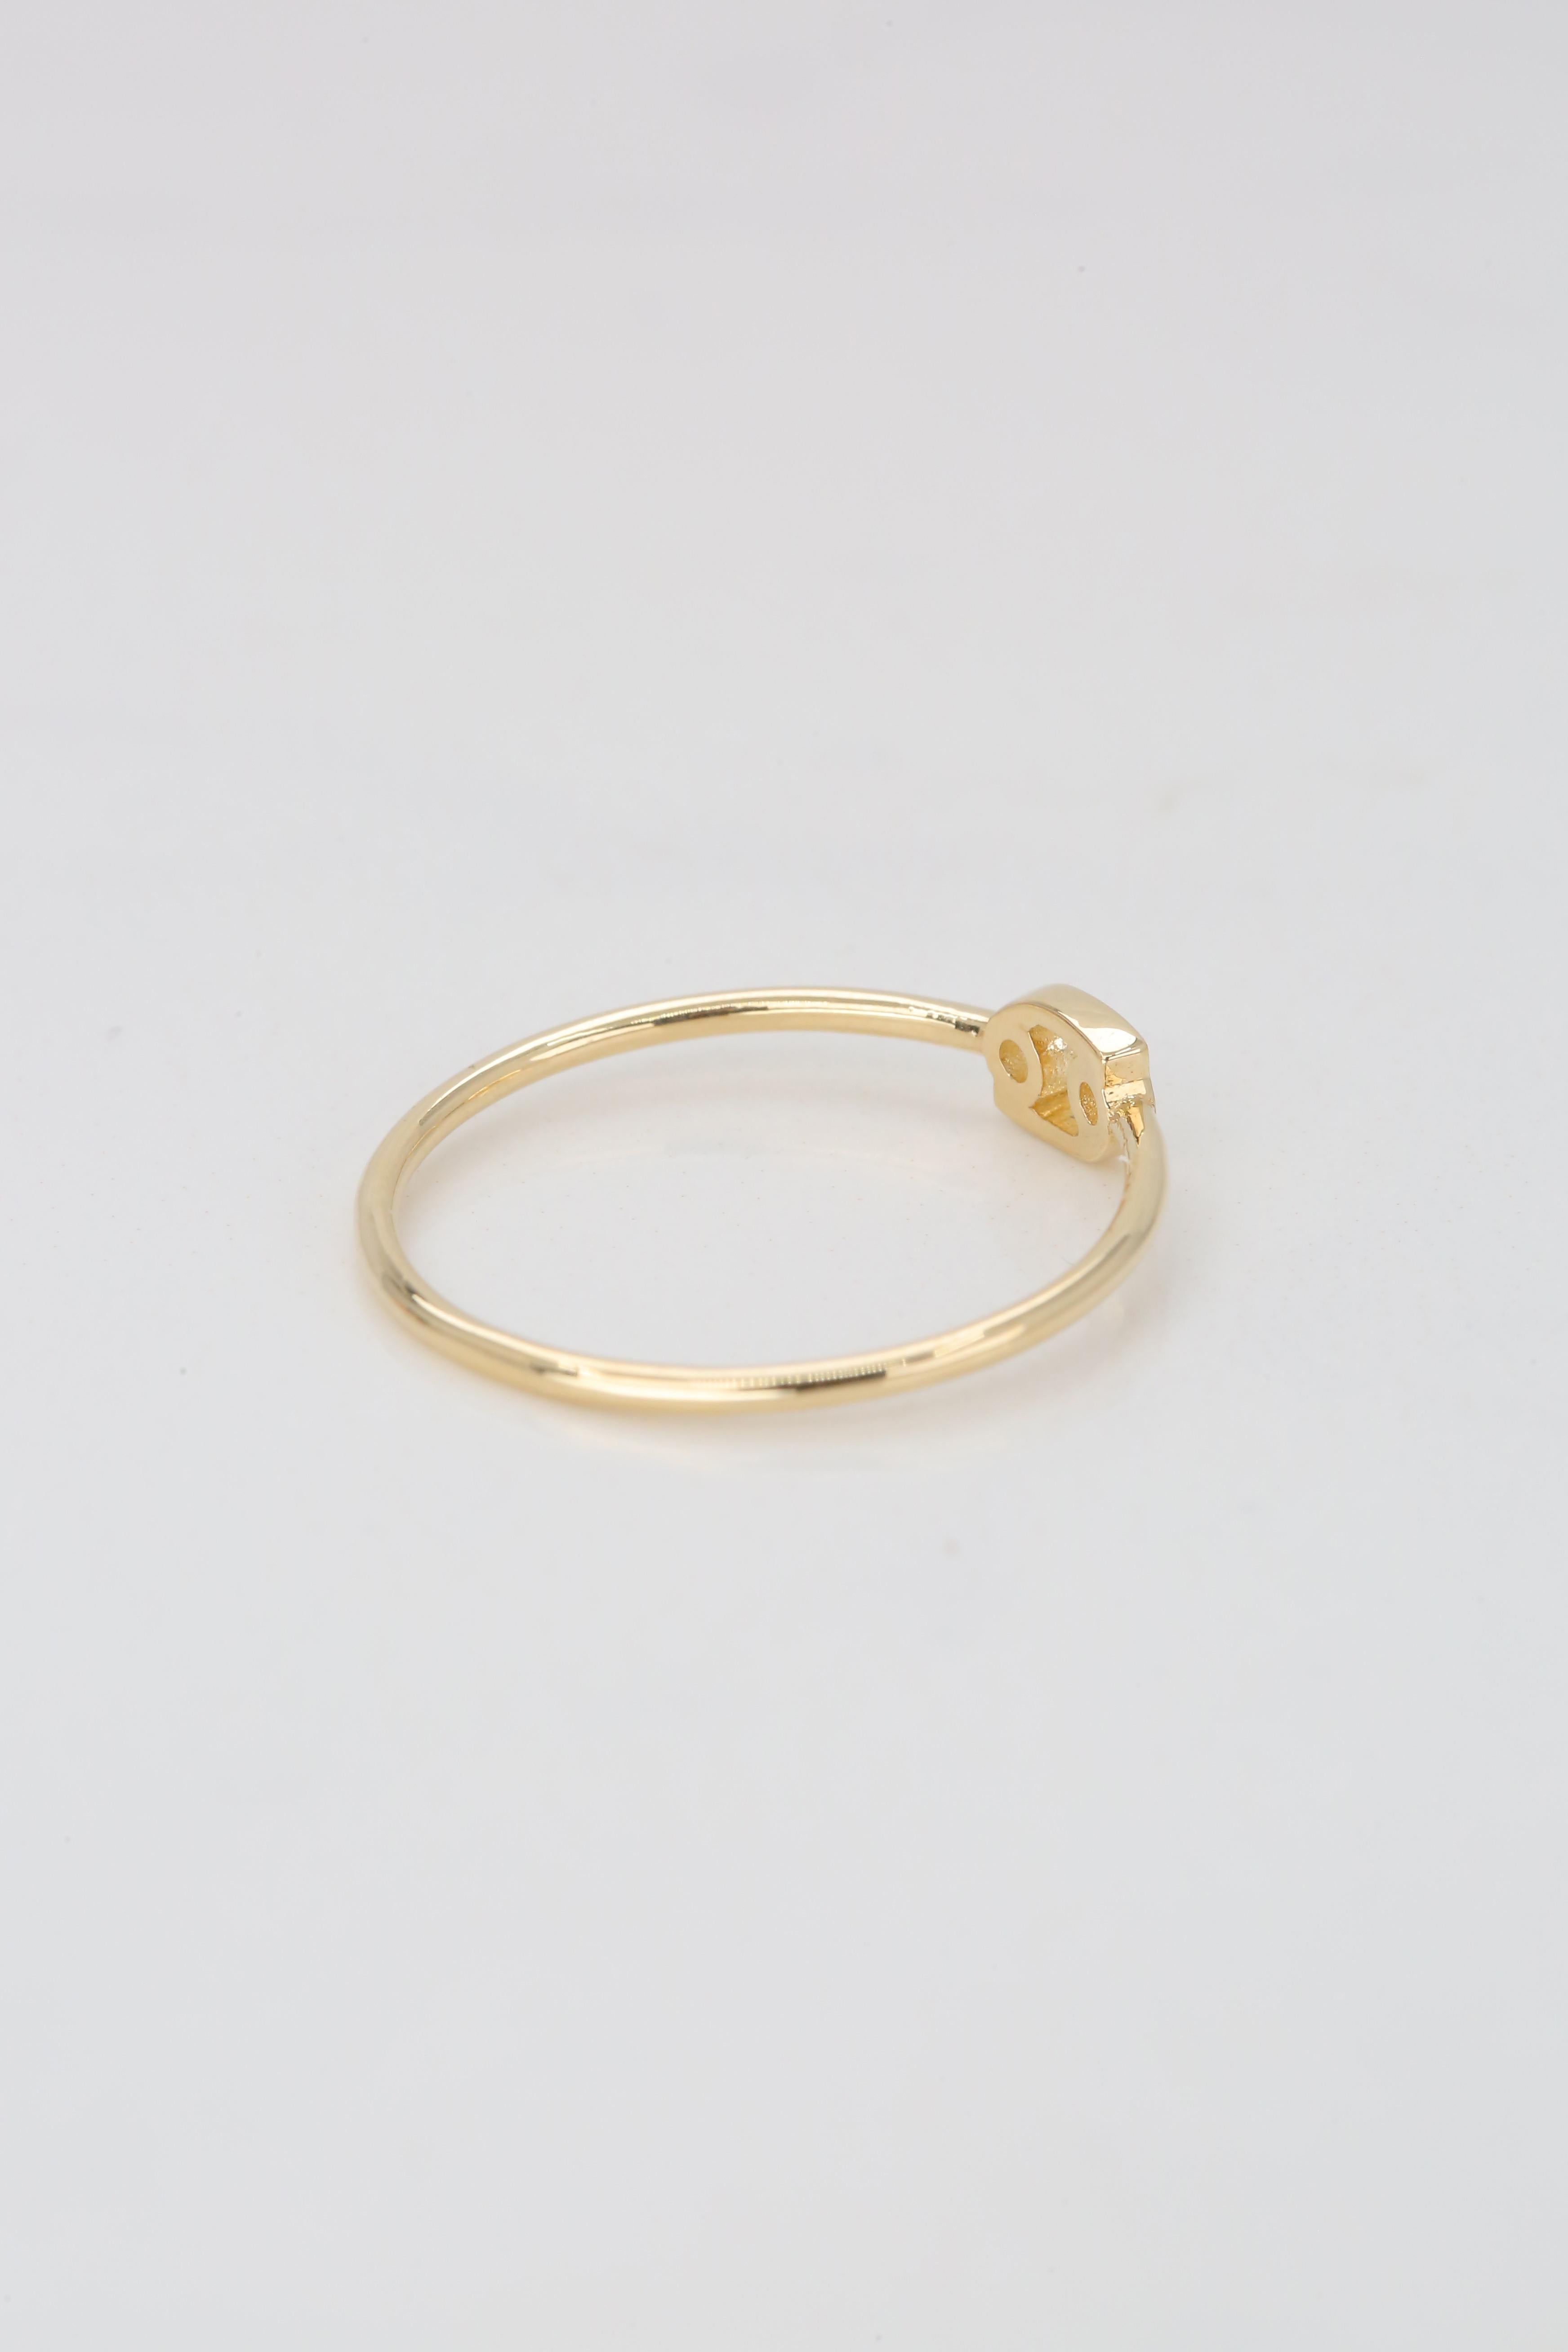 For Sale:  14K Gold Cancer Zodiac Ring, Cancer Sign Zodiac Ring 8